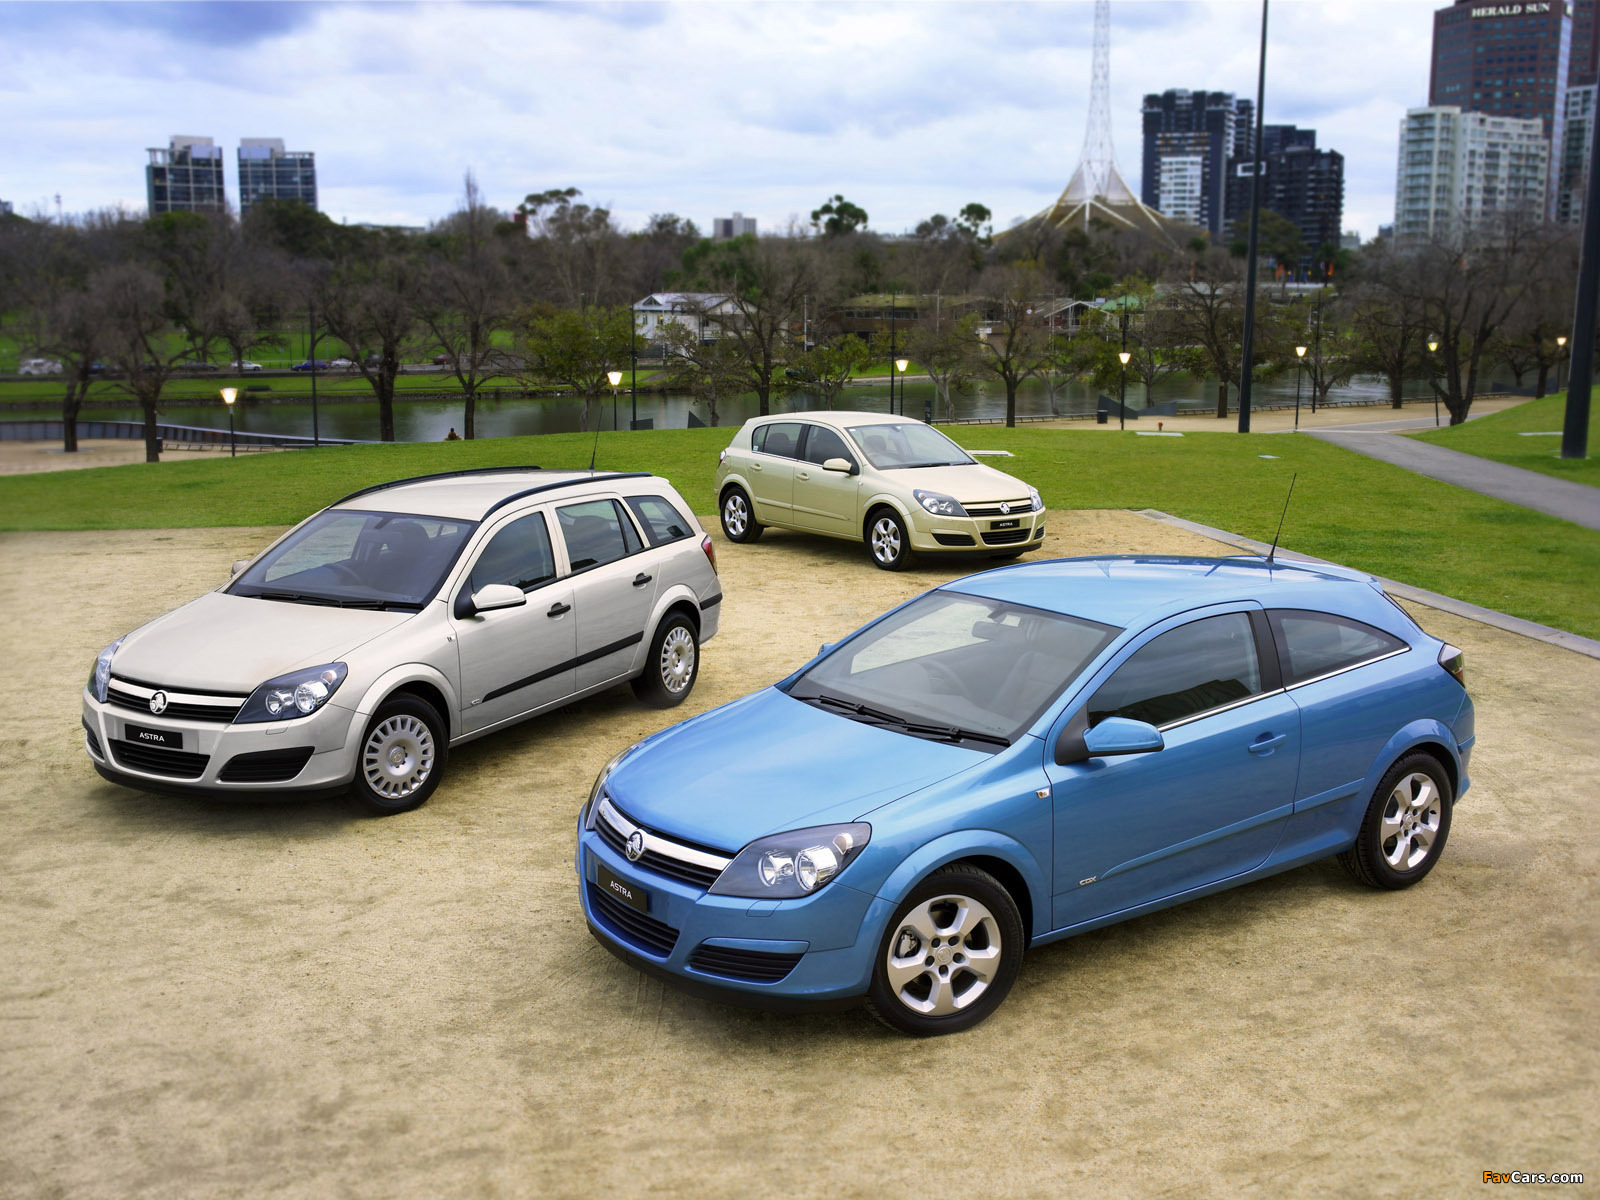 Images of Holden Astra (1600 x 1200)